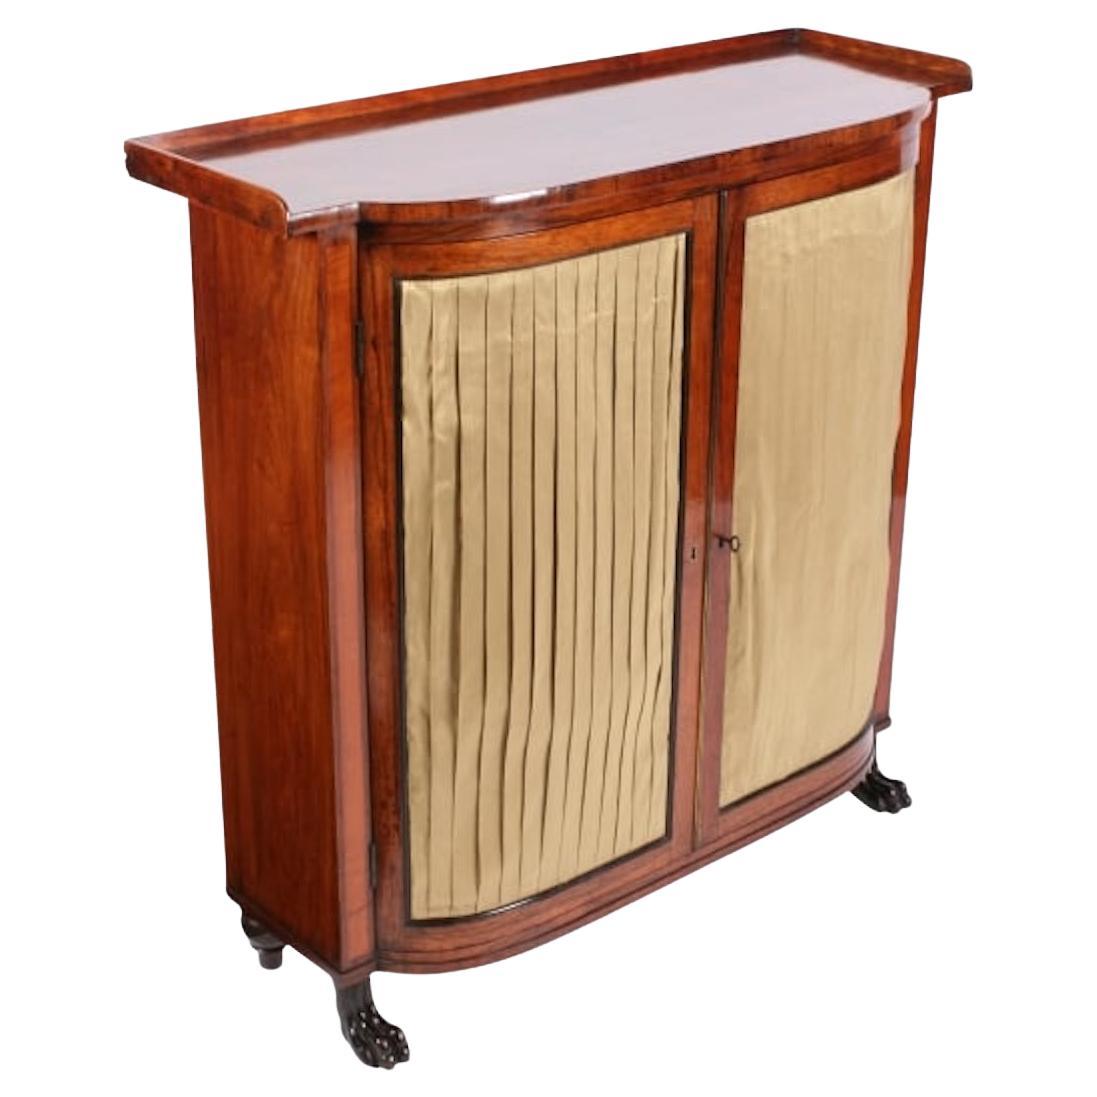 Regency rosewood side cabinet

An early 19th century Regency rosewood side cabinet.

The two door bow fronted cabinet stands on four carved paw feet.

The pair of doors have pleated silk covered centre panels with an ebony bead inner edge and